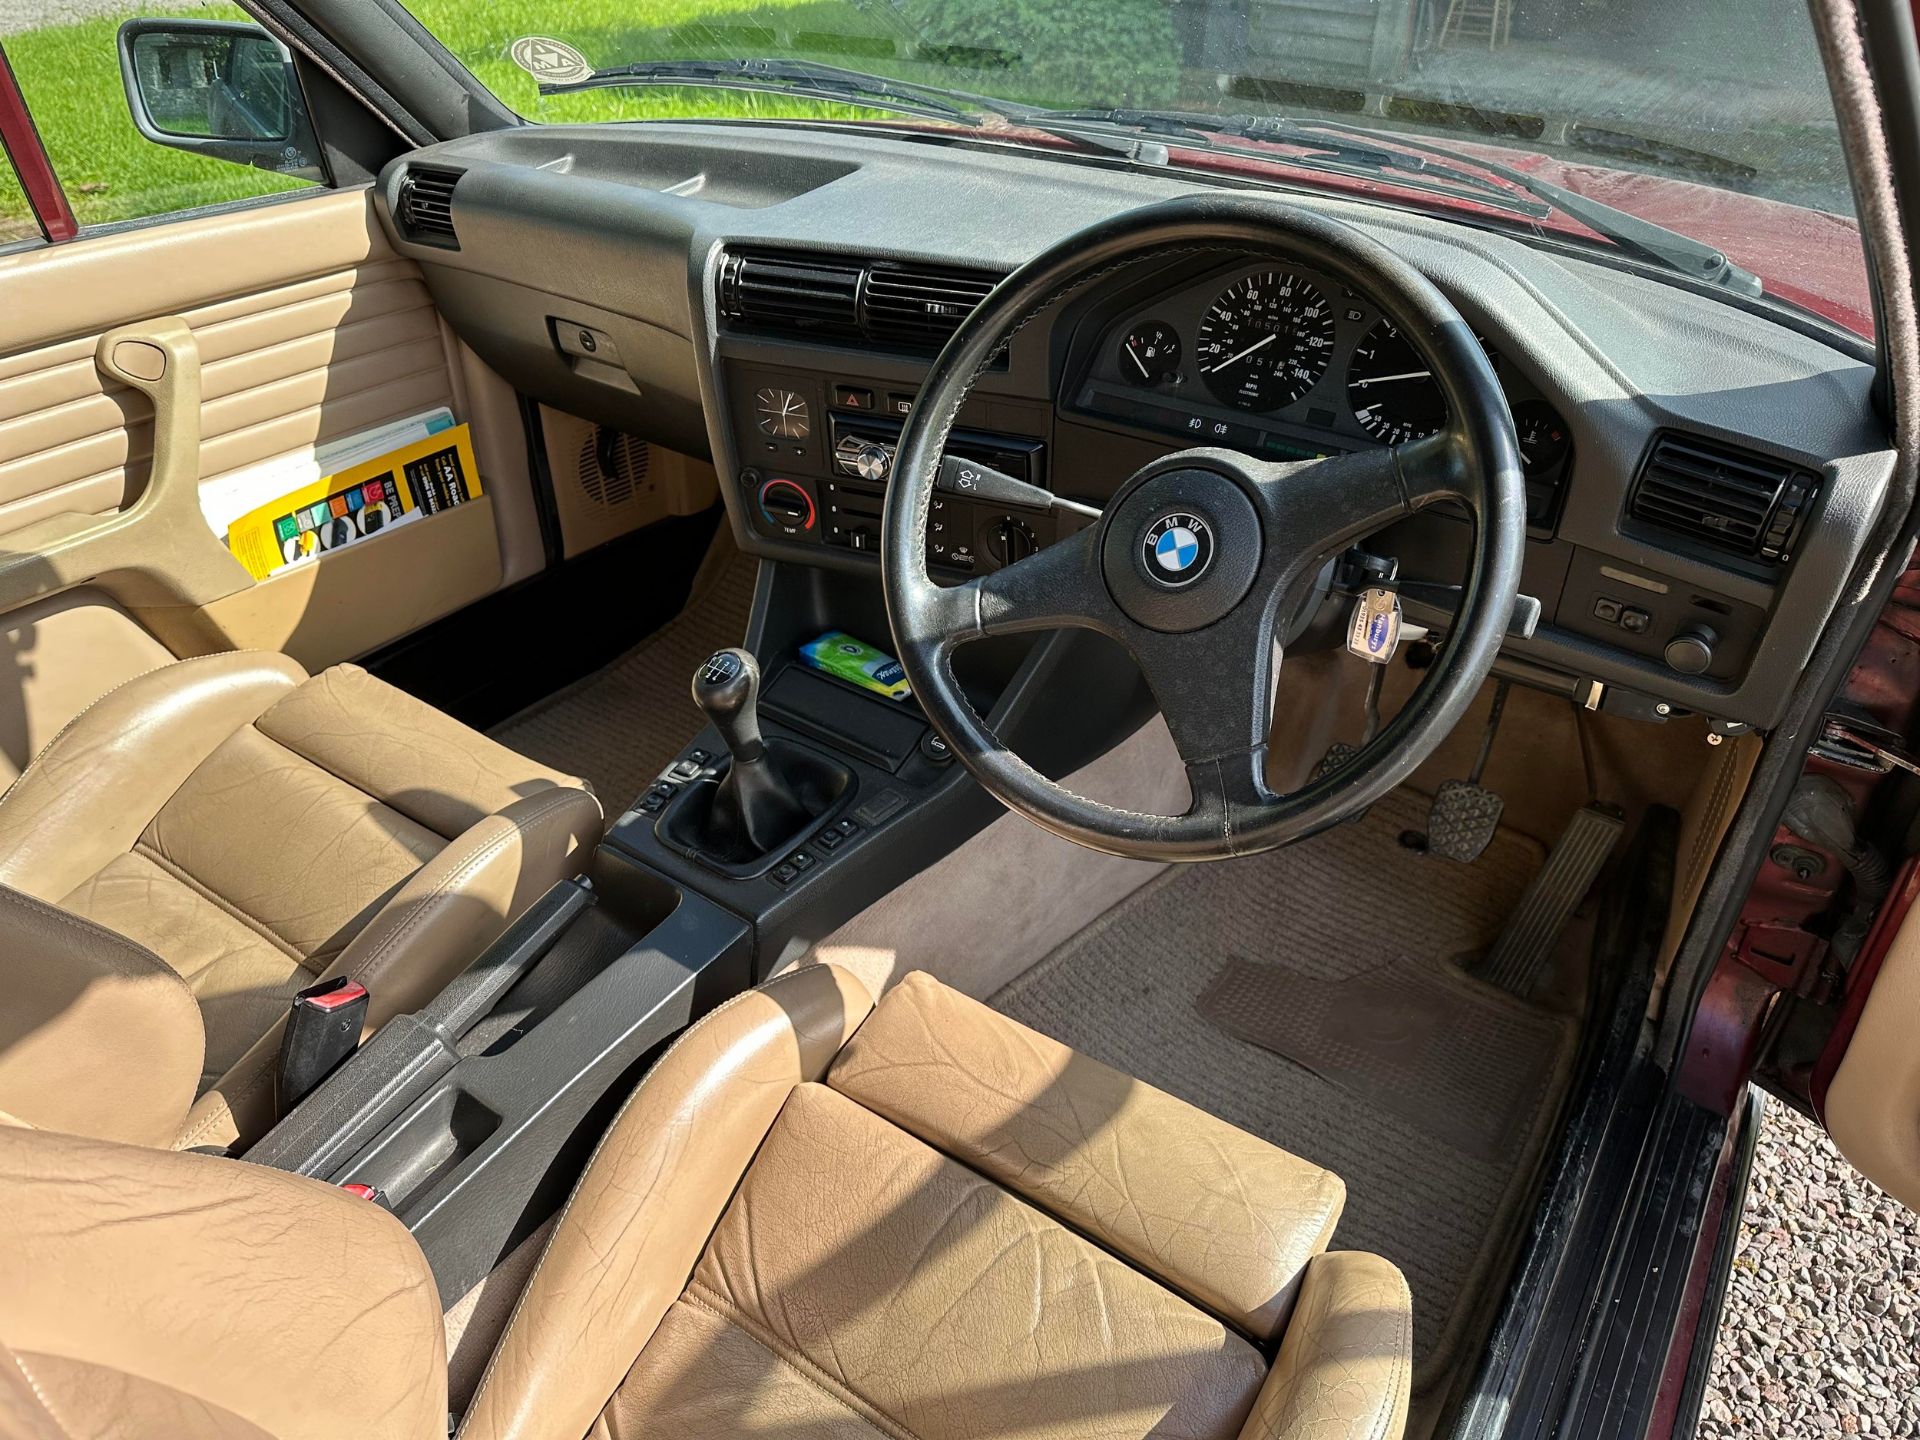 1990 BMW 325i Convertible Registration number G171 PYC Chassis number WBABB12070LB95832 Engine - Image 63 of 67